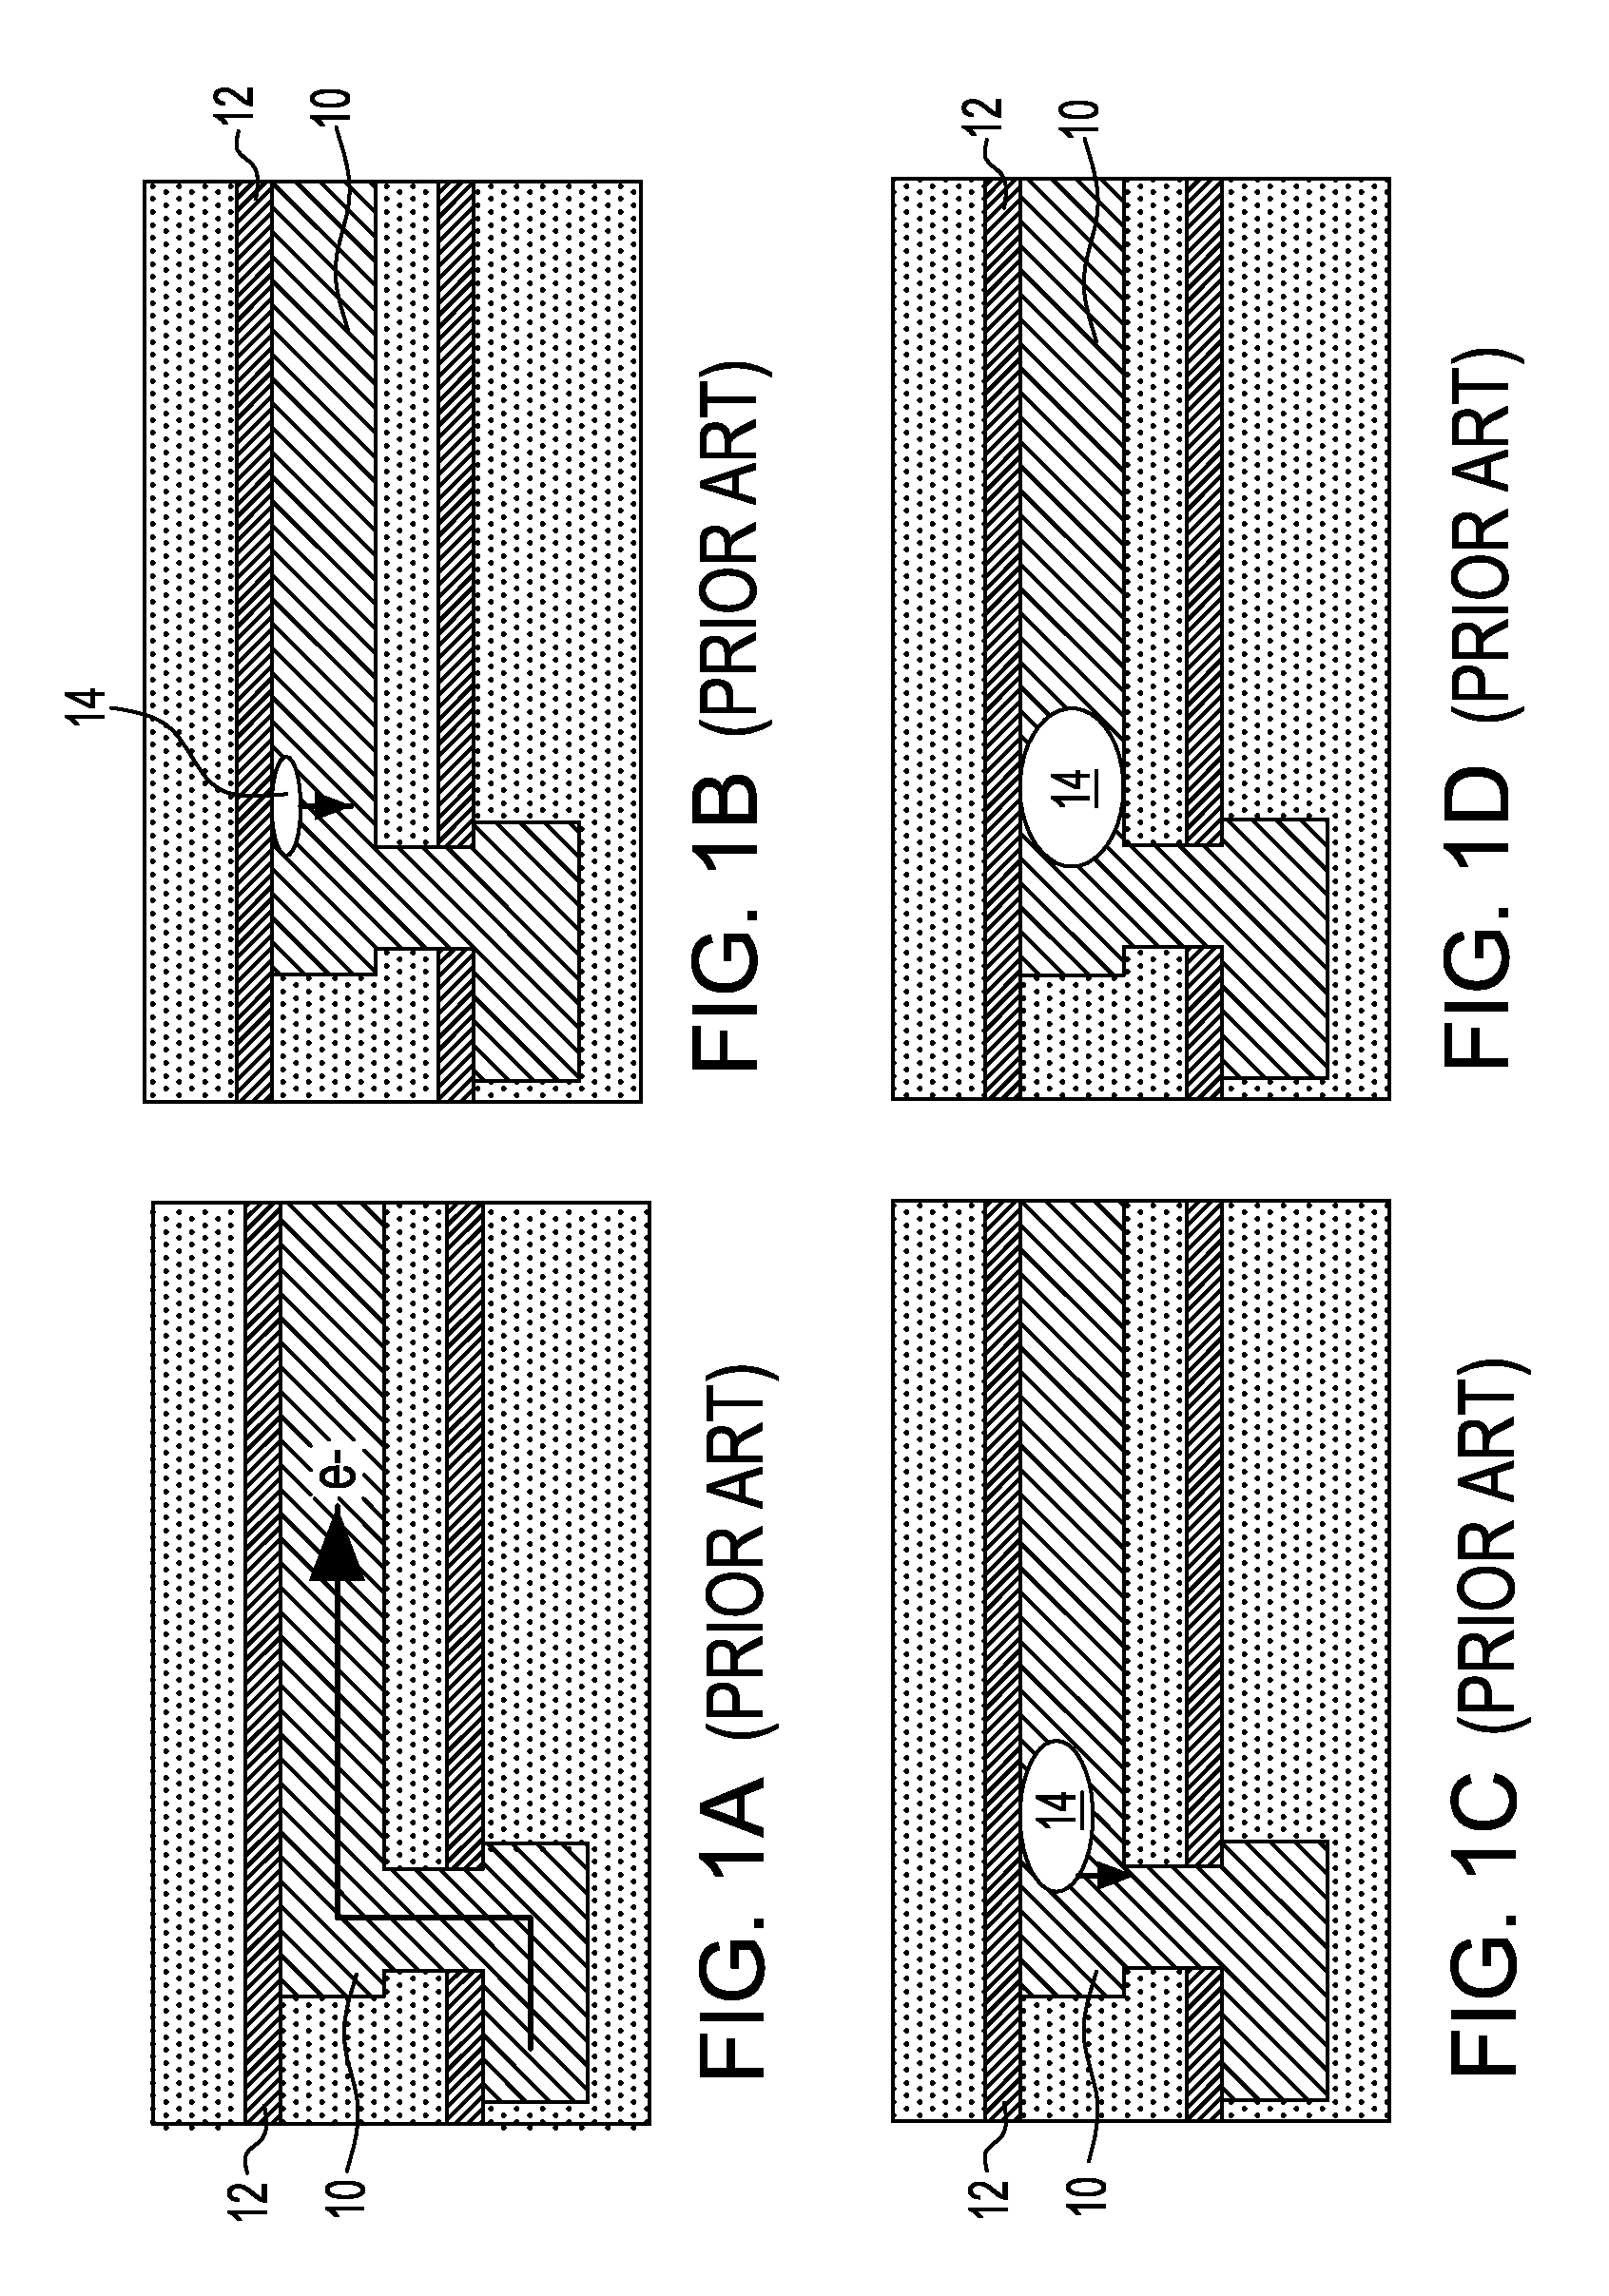 Noble metal cap for interconnect structures